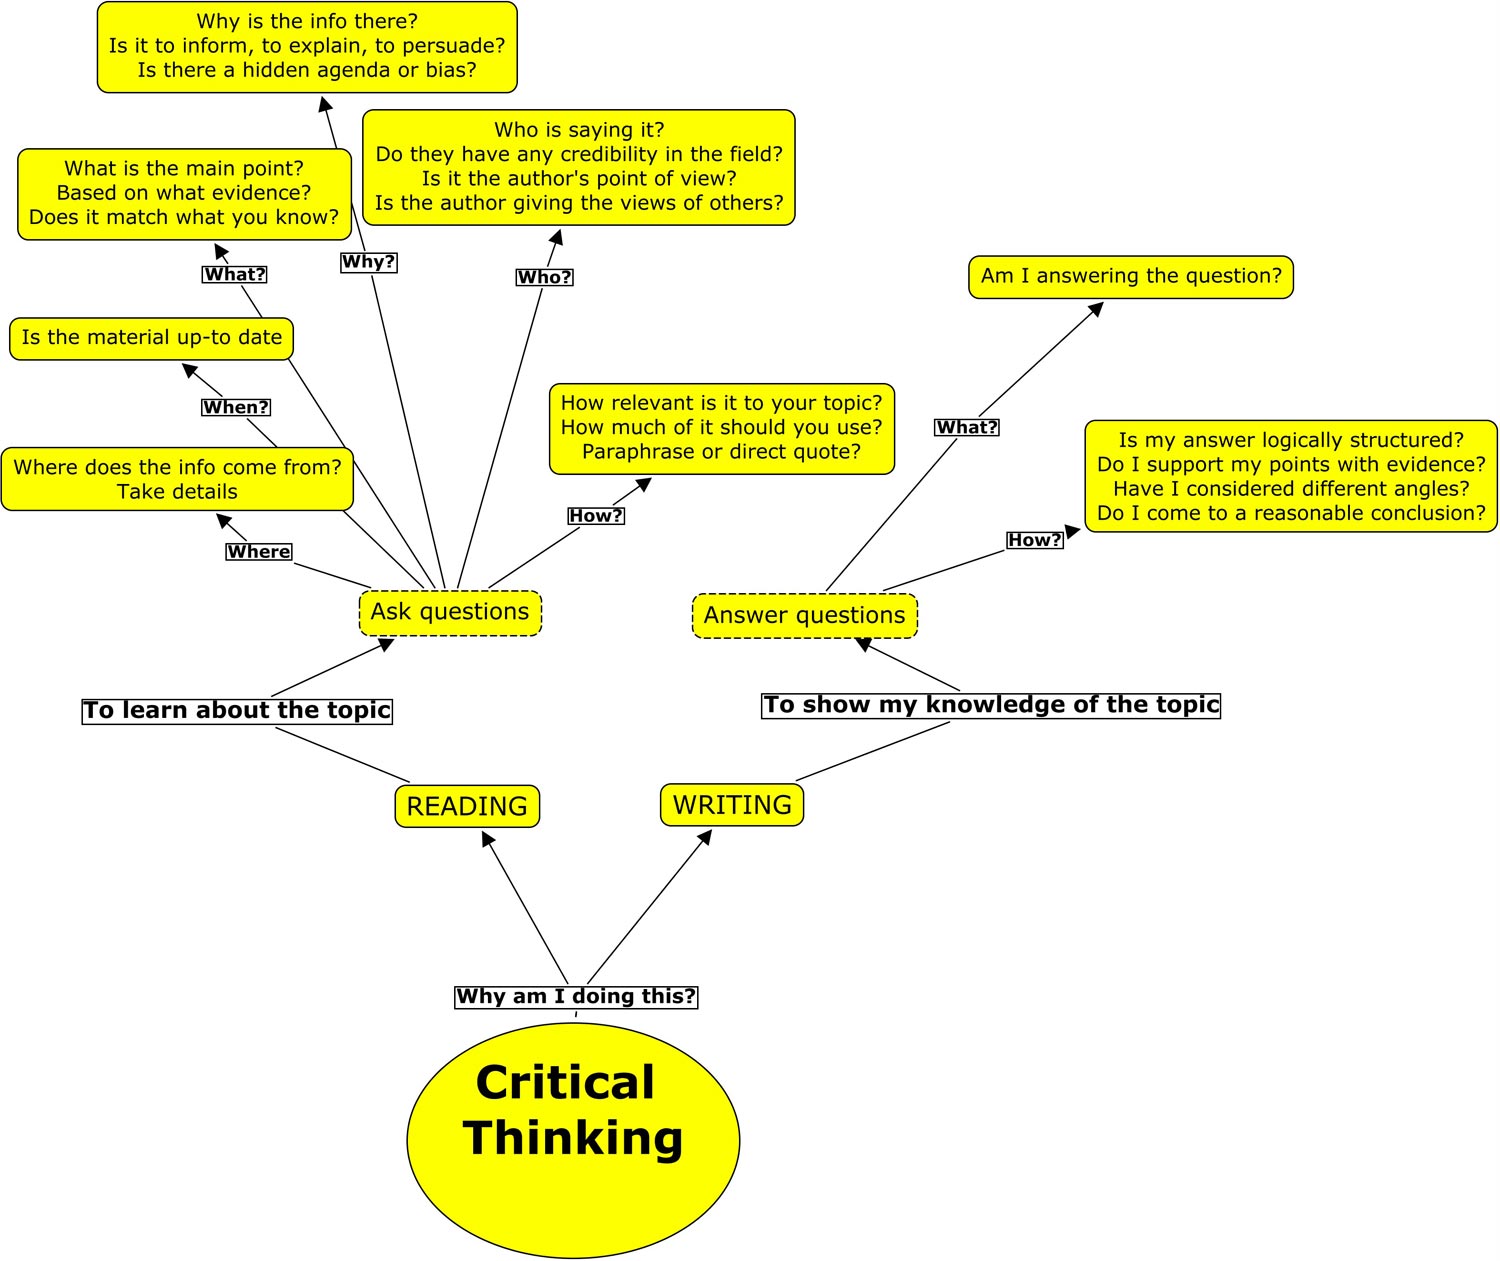 critical thinking in mind maps